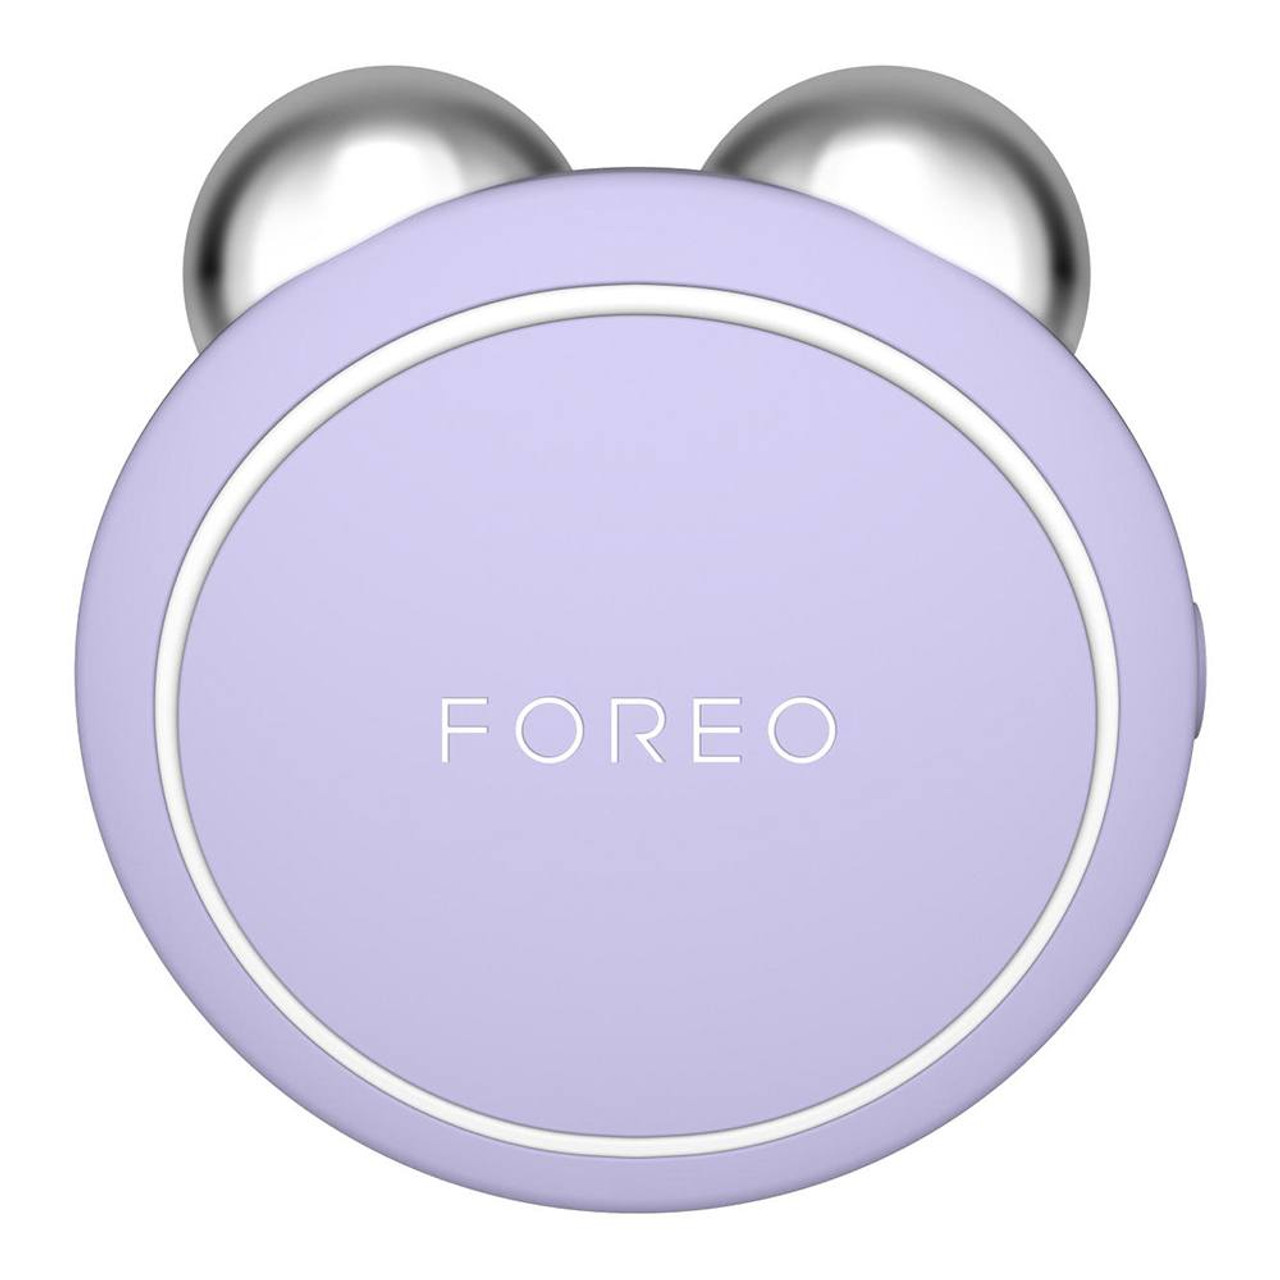 The FOREO Bear Facial Toning Device: Everything You Need To Know